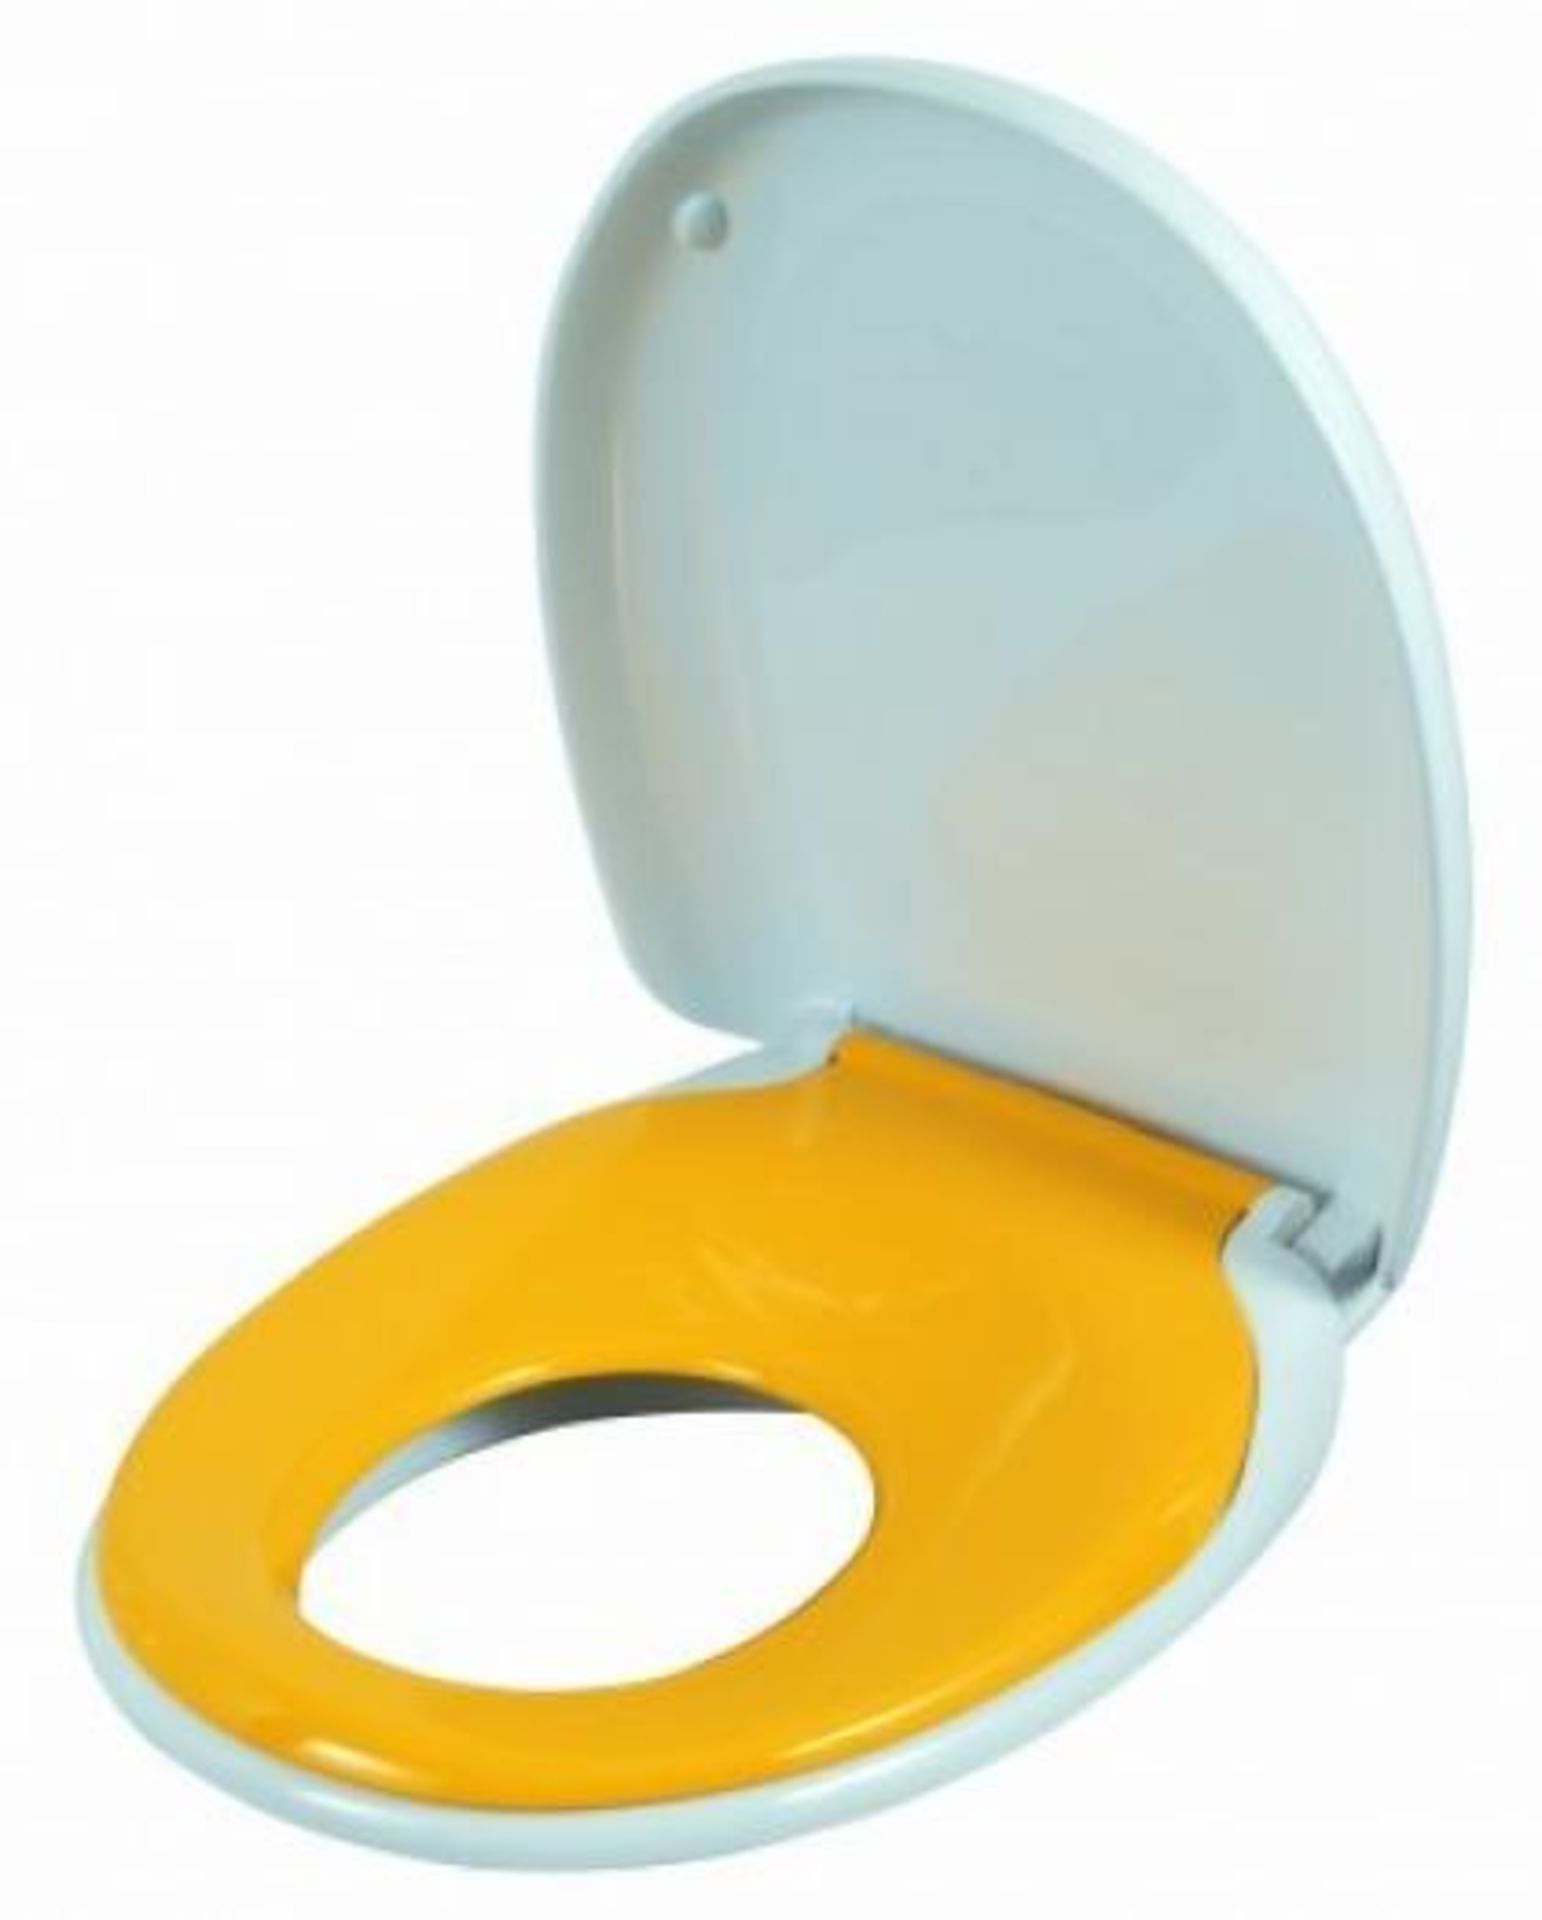 10 x Dubaloo 2 in 1 Family Training Toilet Seats - One Seat For All The Family - Full Size Toilet - Image 2 of 2